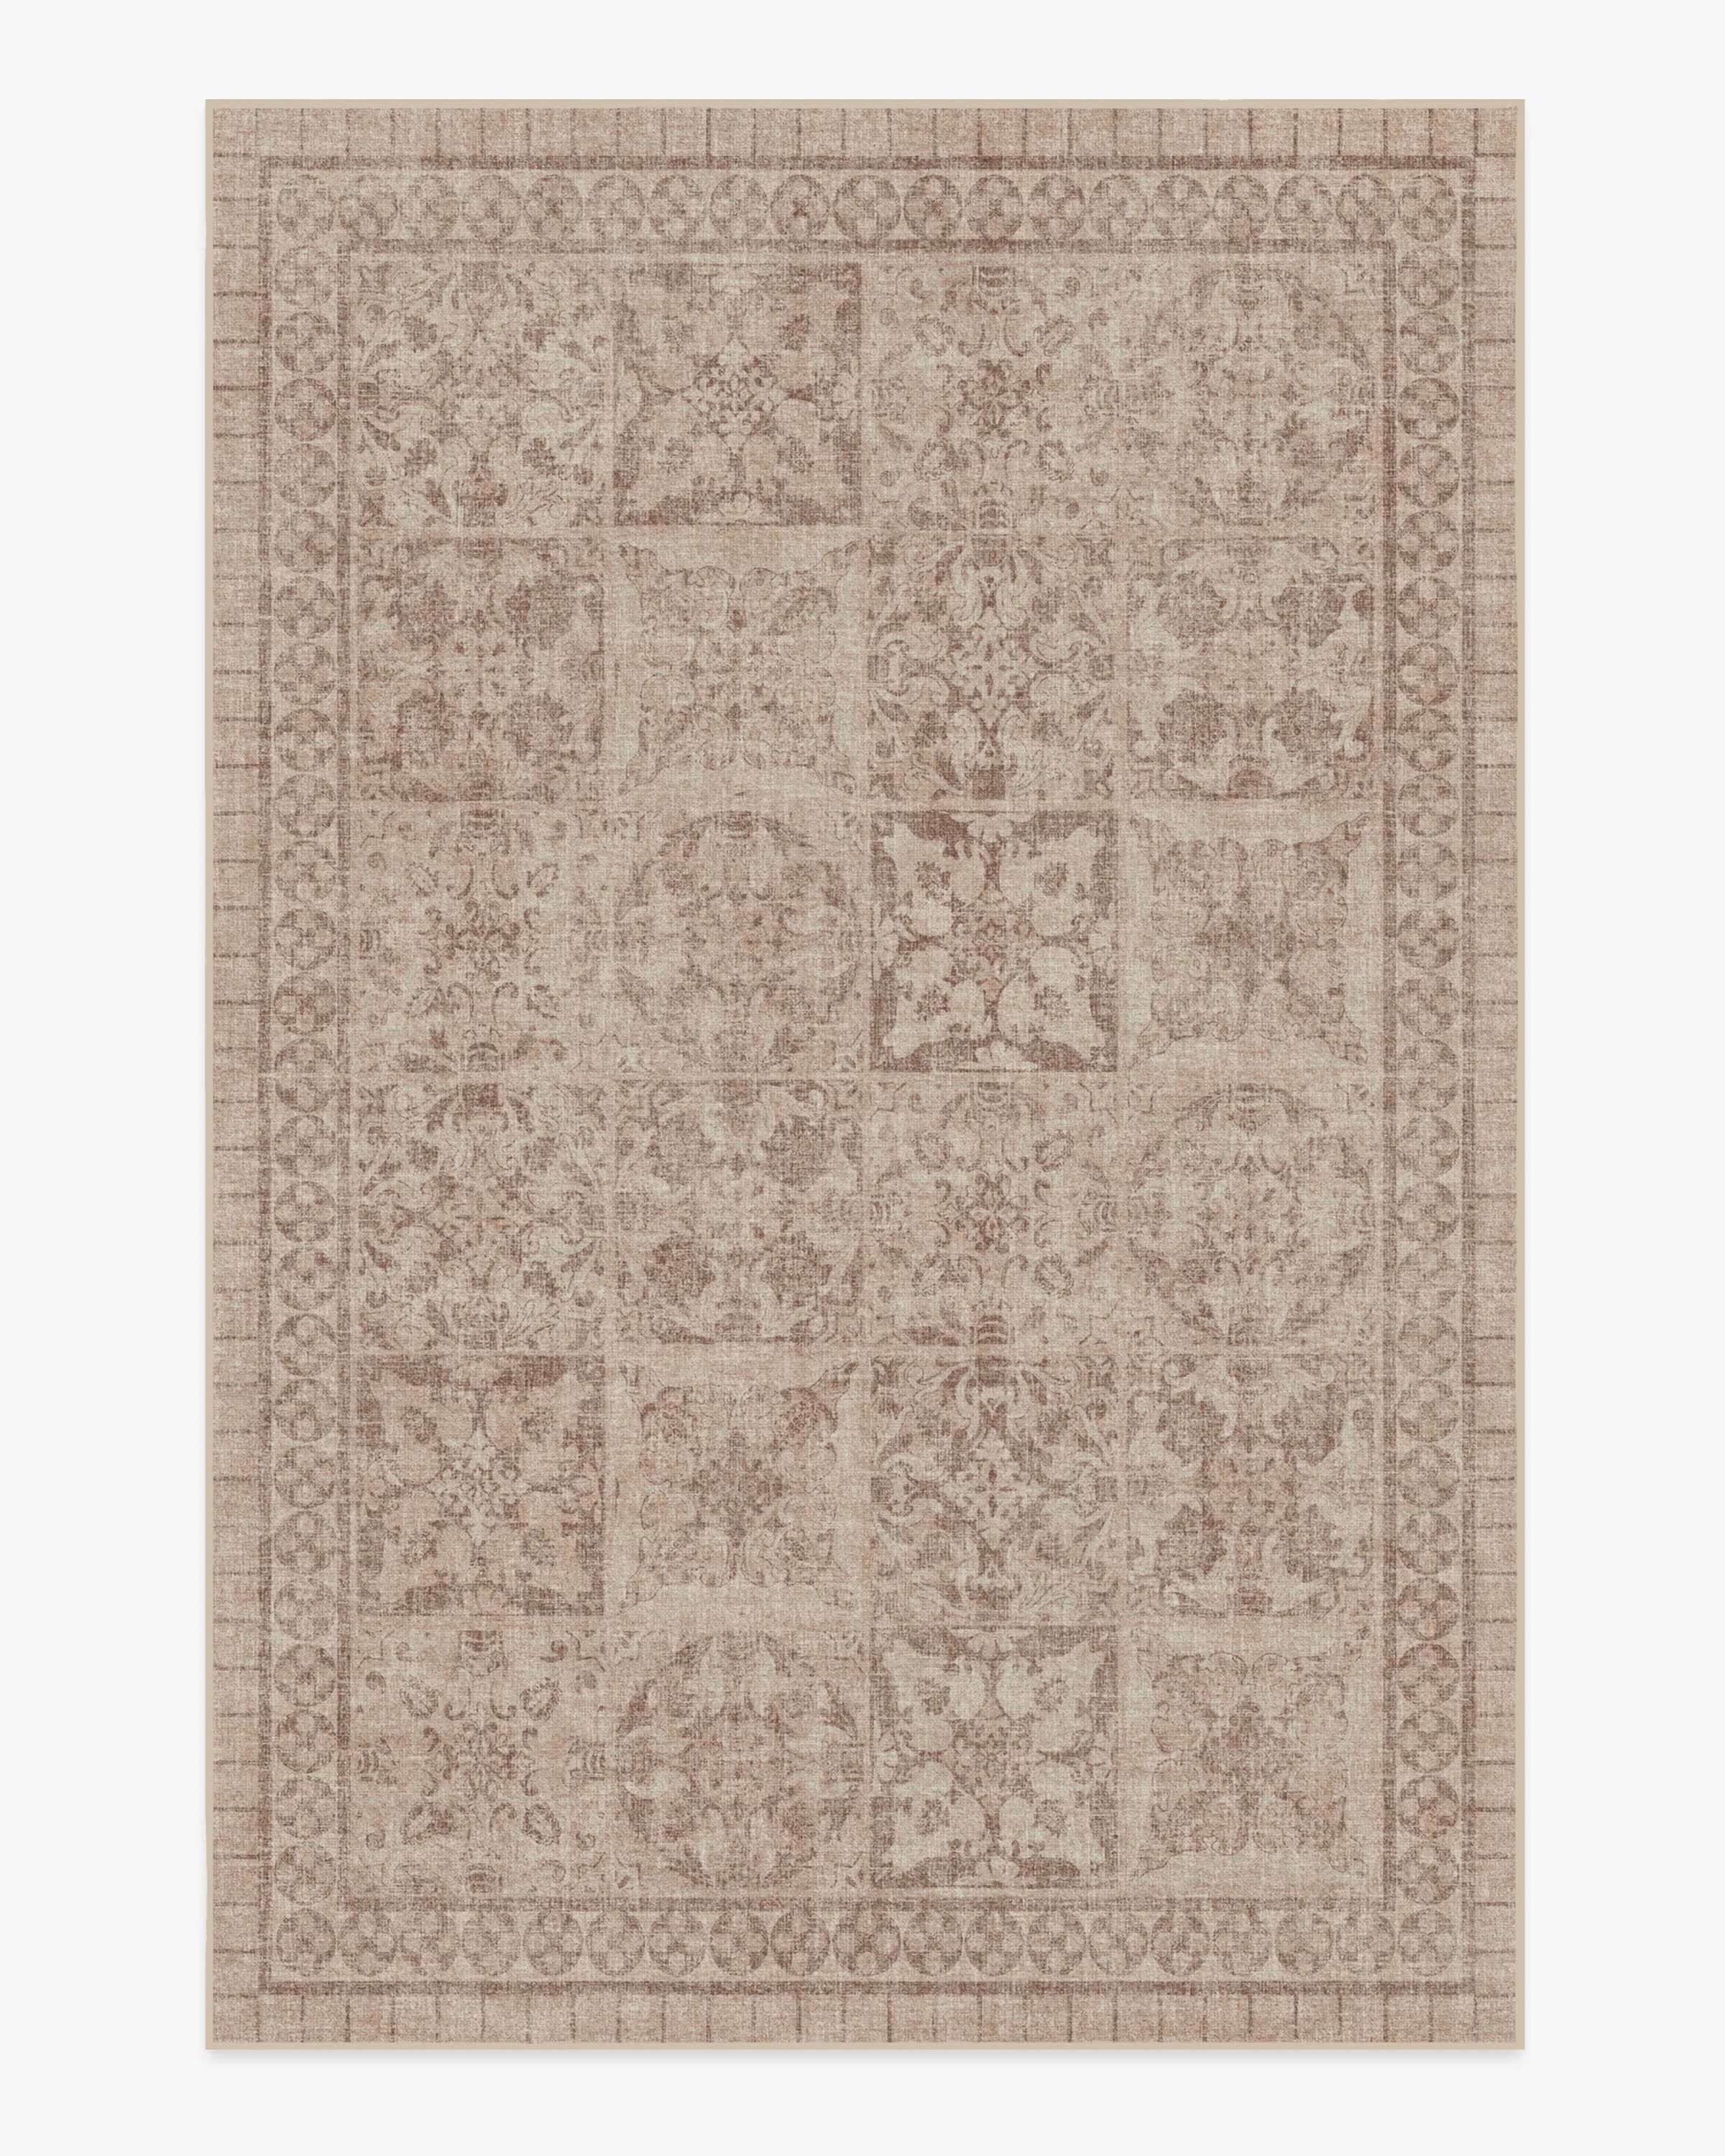 The Hiltons Astoria Rose Gold Rug | Ruggable | Ruggable